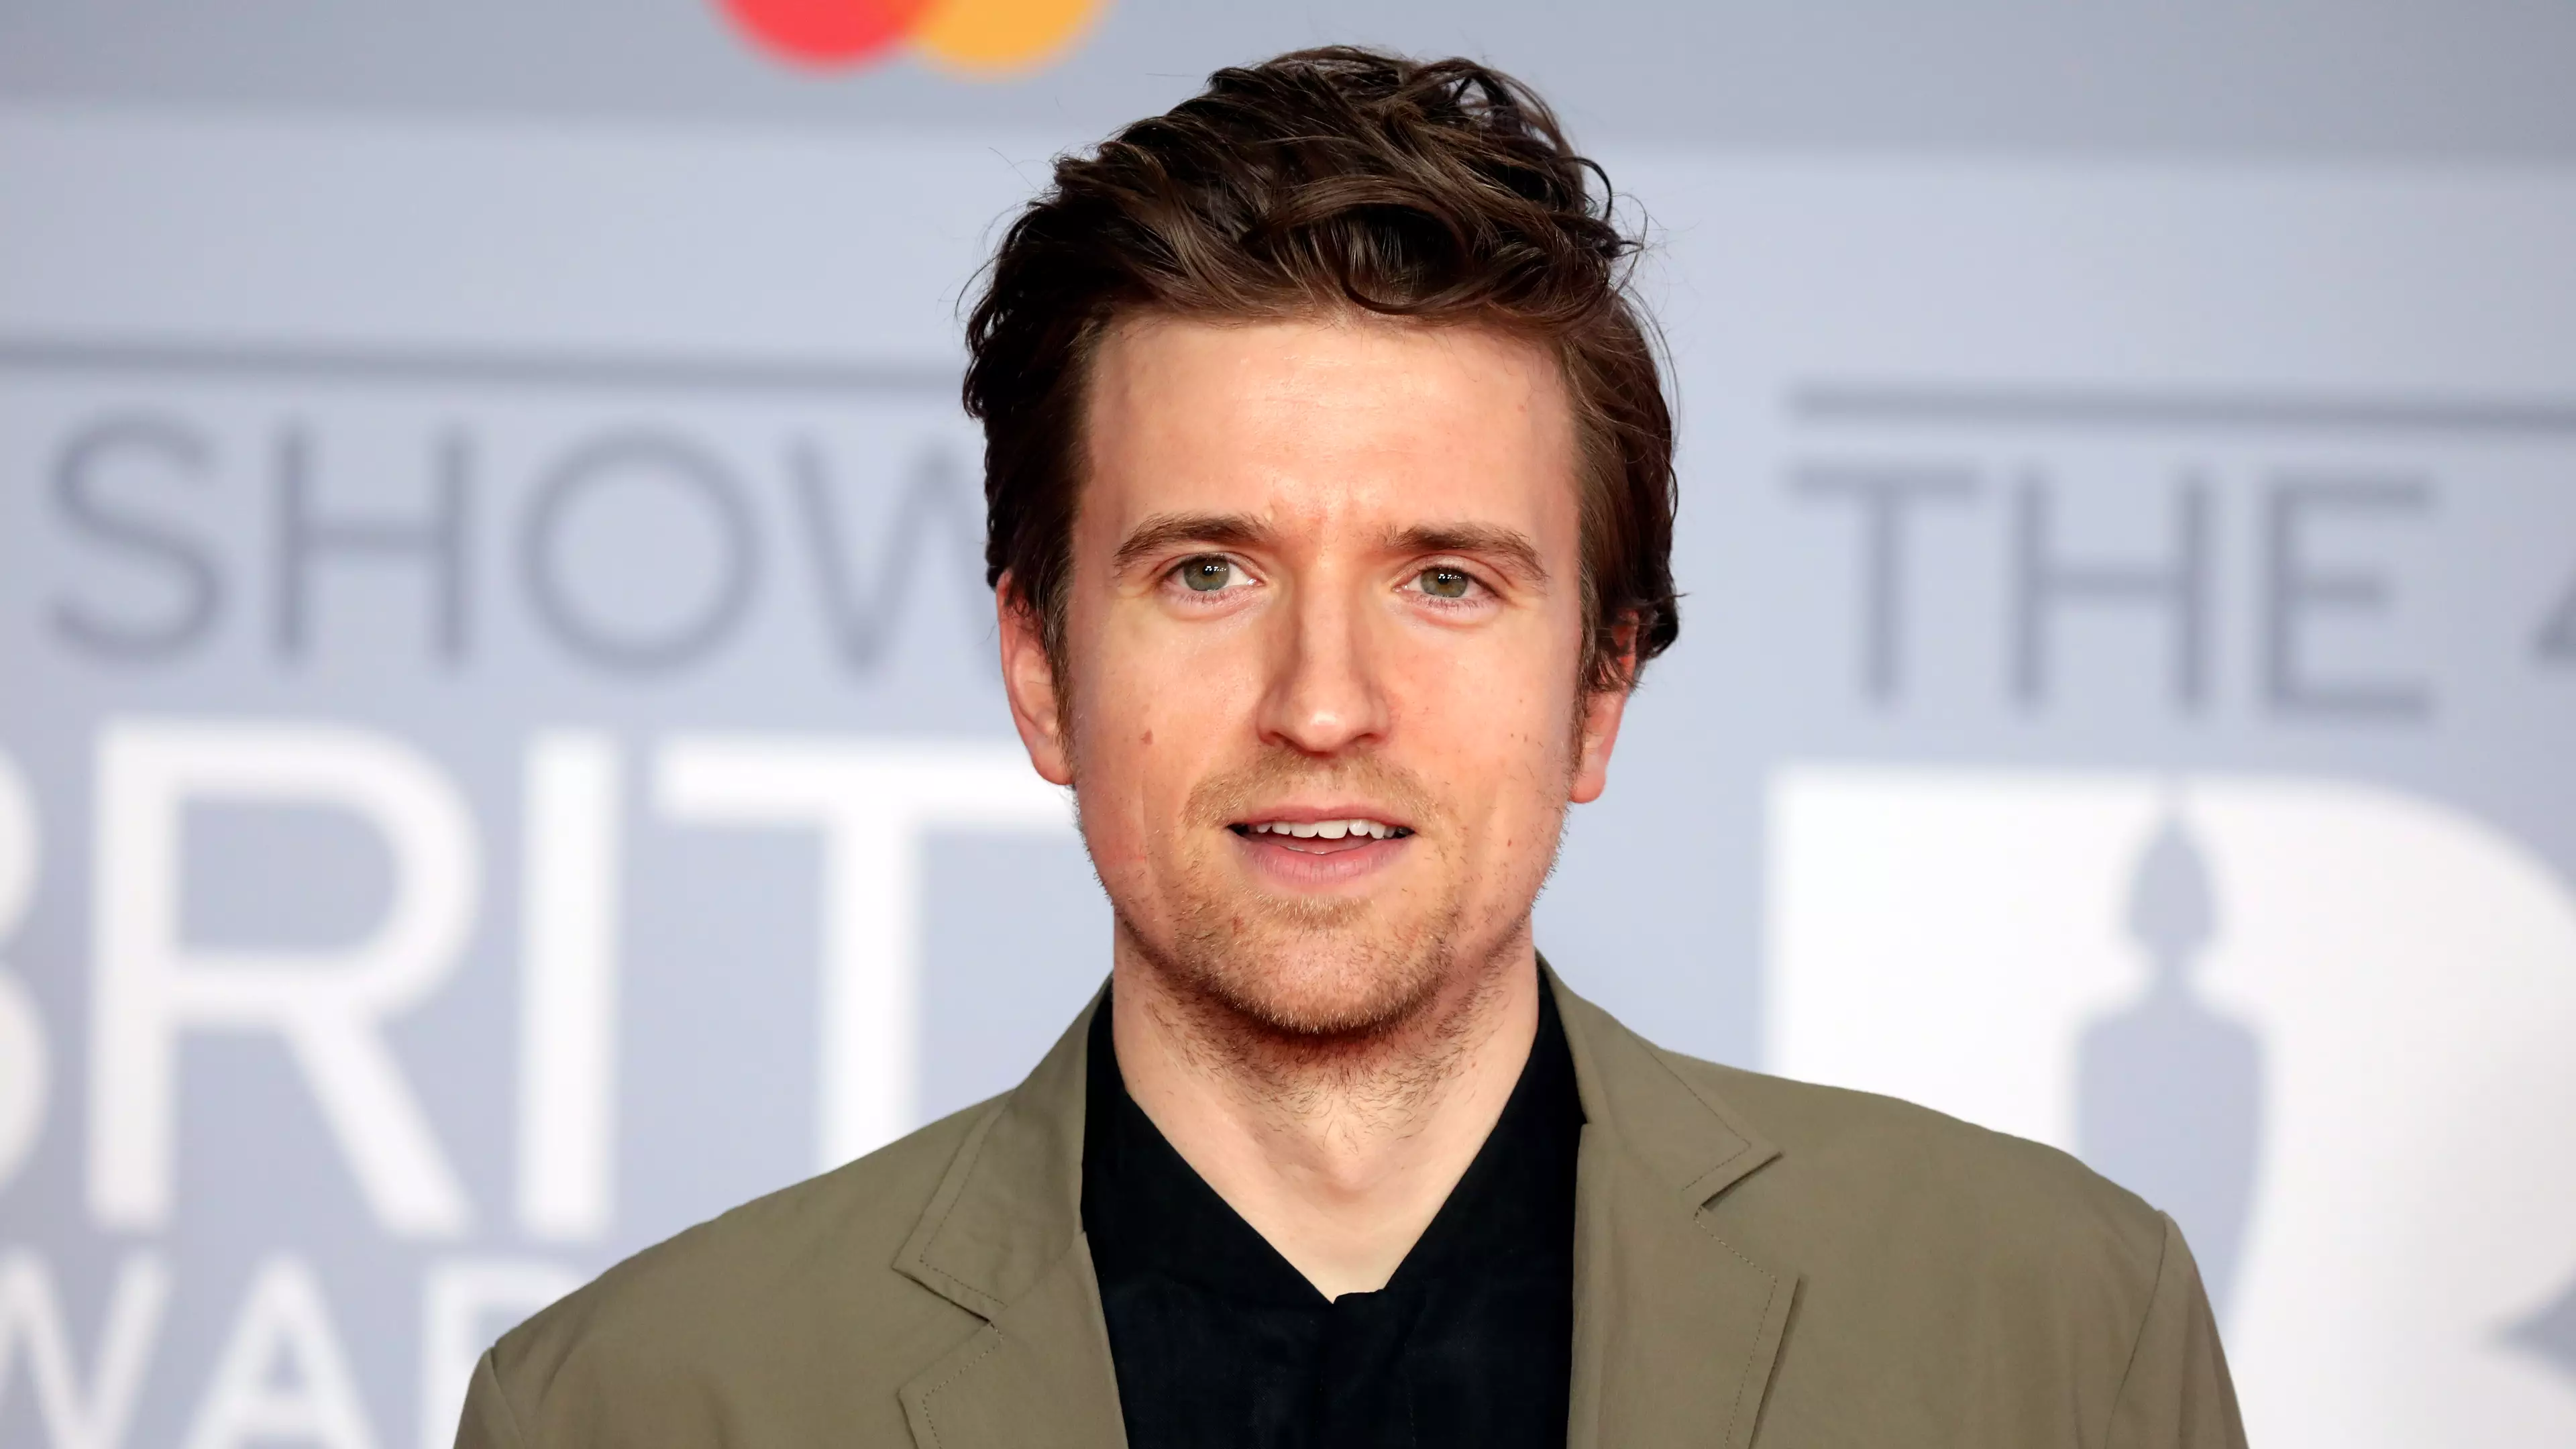 Greg James Fails To Turn Up For His BBC Radio 1 Breakfast Show After BRIT Awards